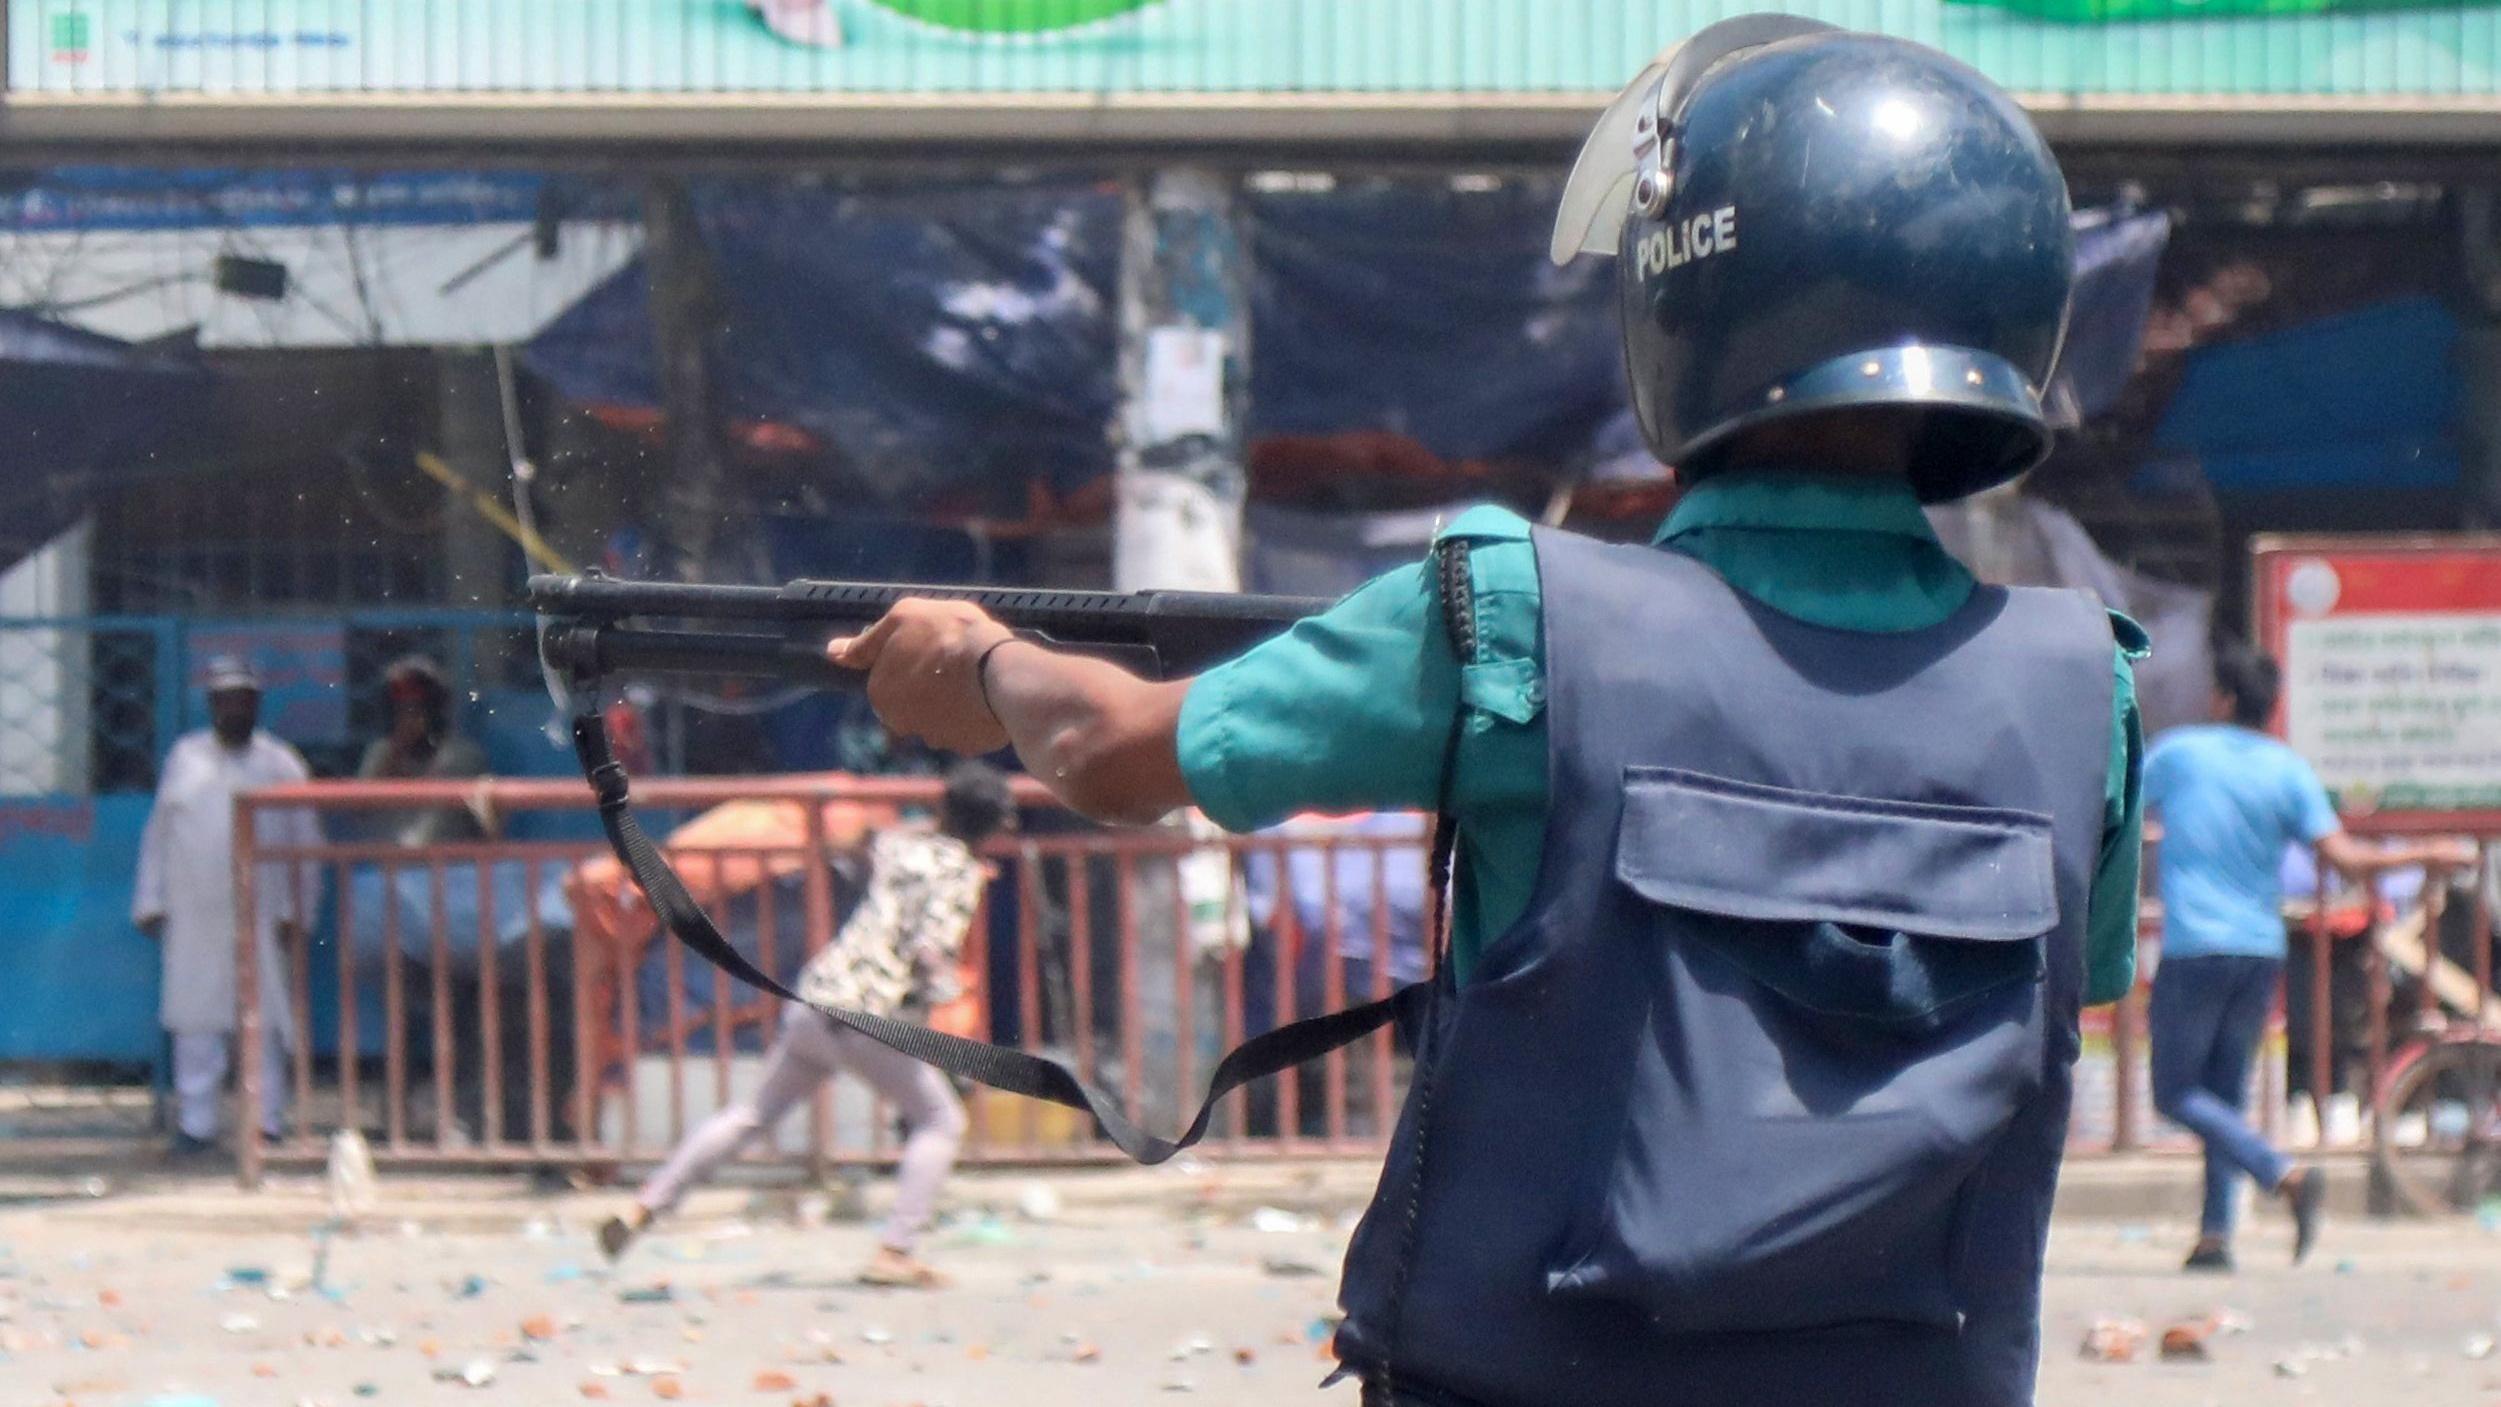 Unjustified: Videos reveal brutality during Bangladesh protests